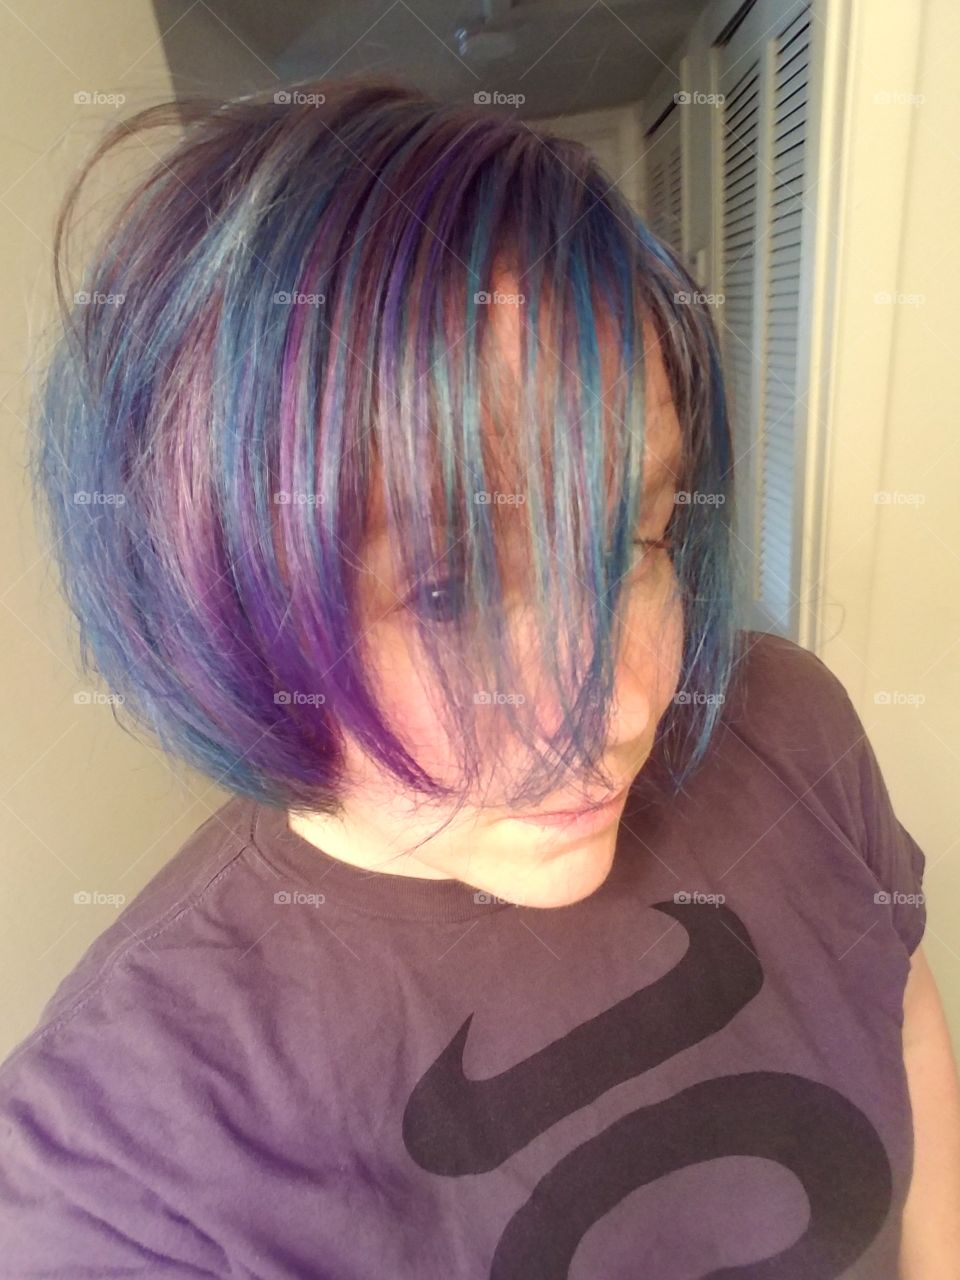 Unnatural hair colors like blue and purple are what happens when boredom strikes.